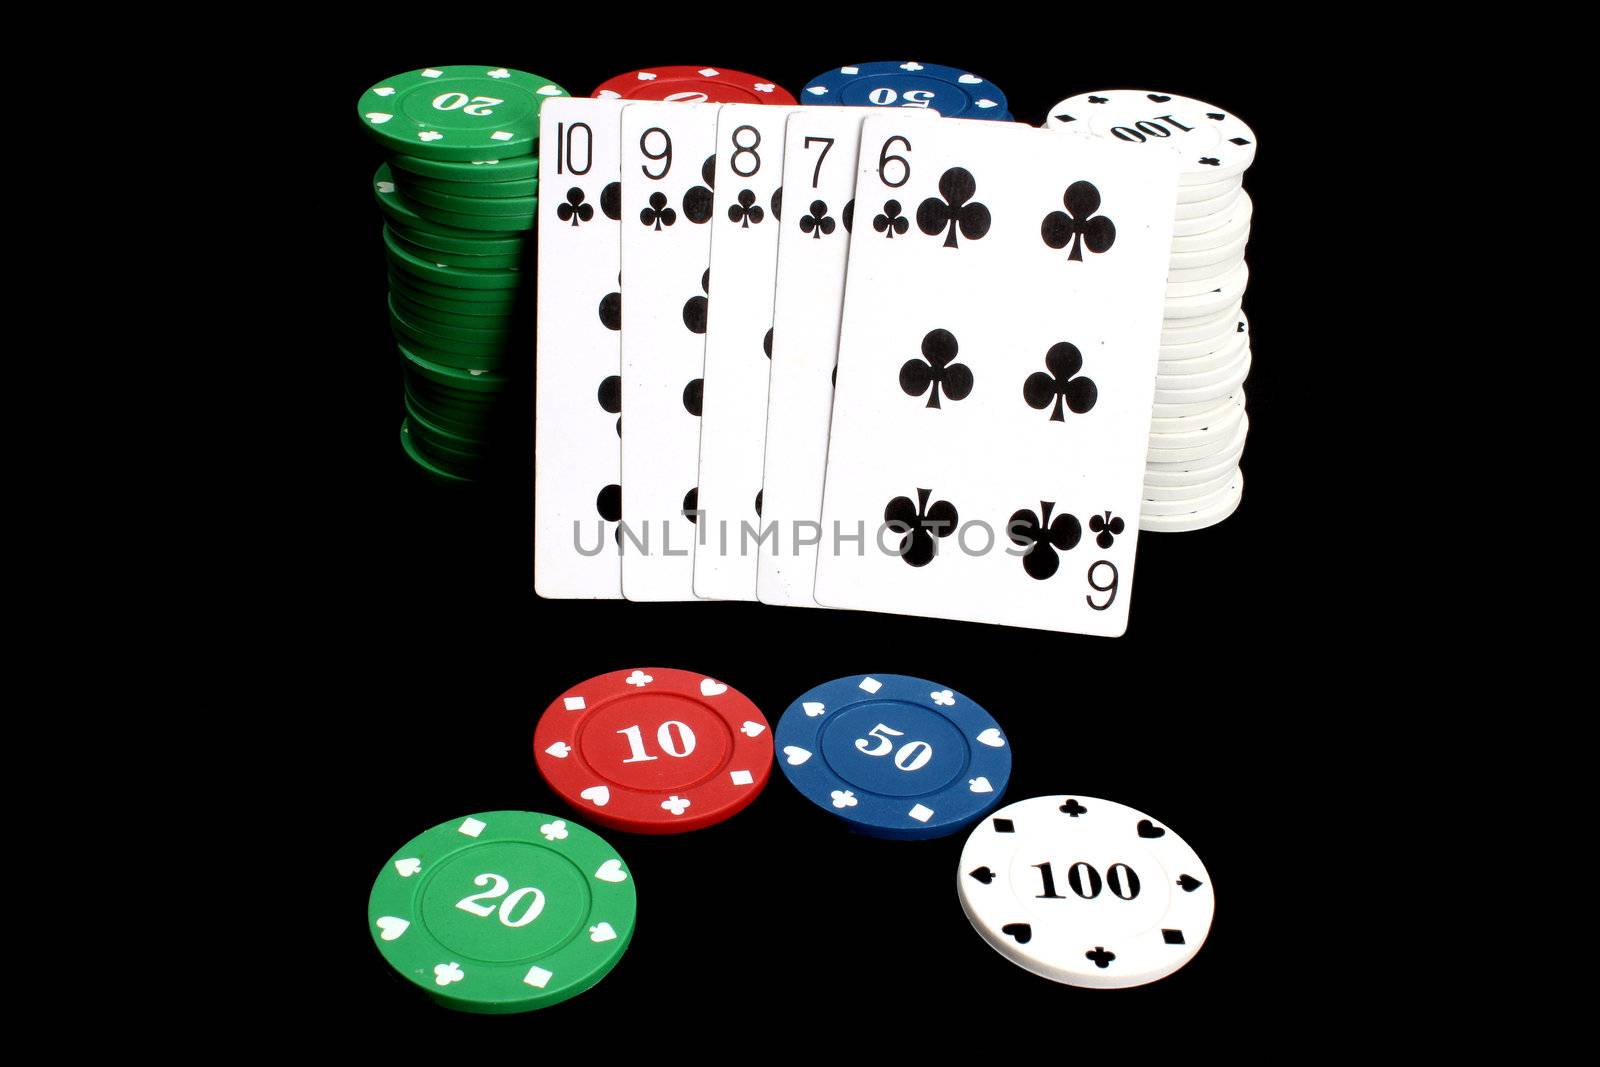 A poker hand of flush consisting of all club cards against gambling chips, on black studio background.